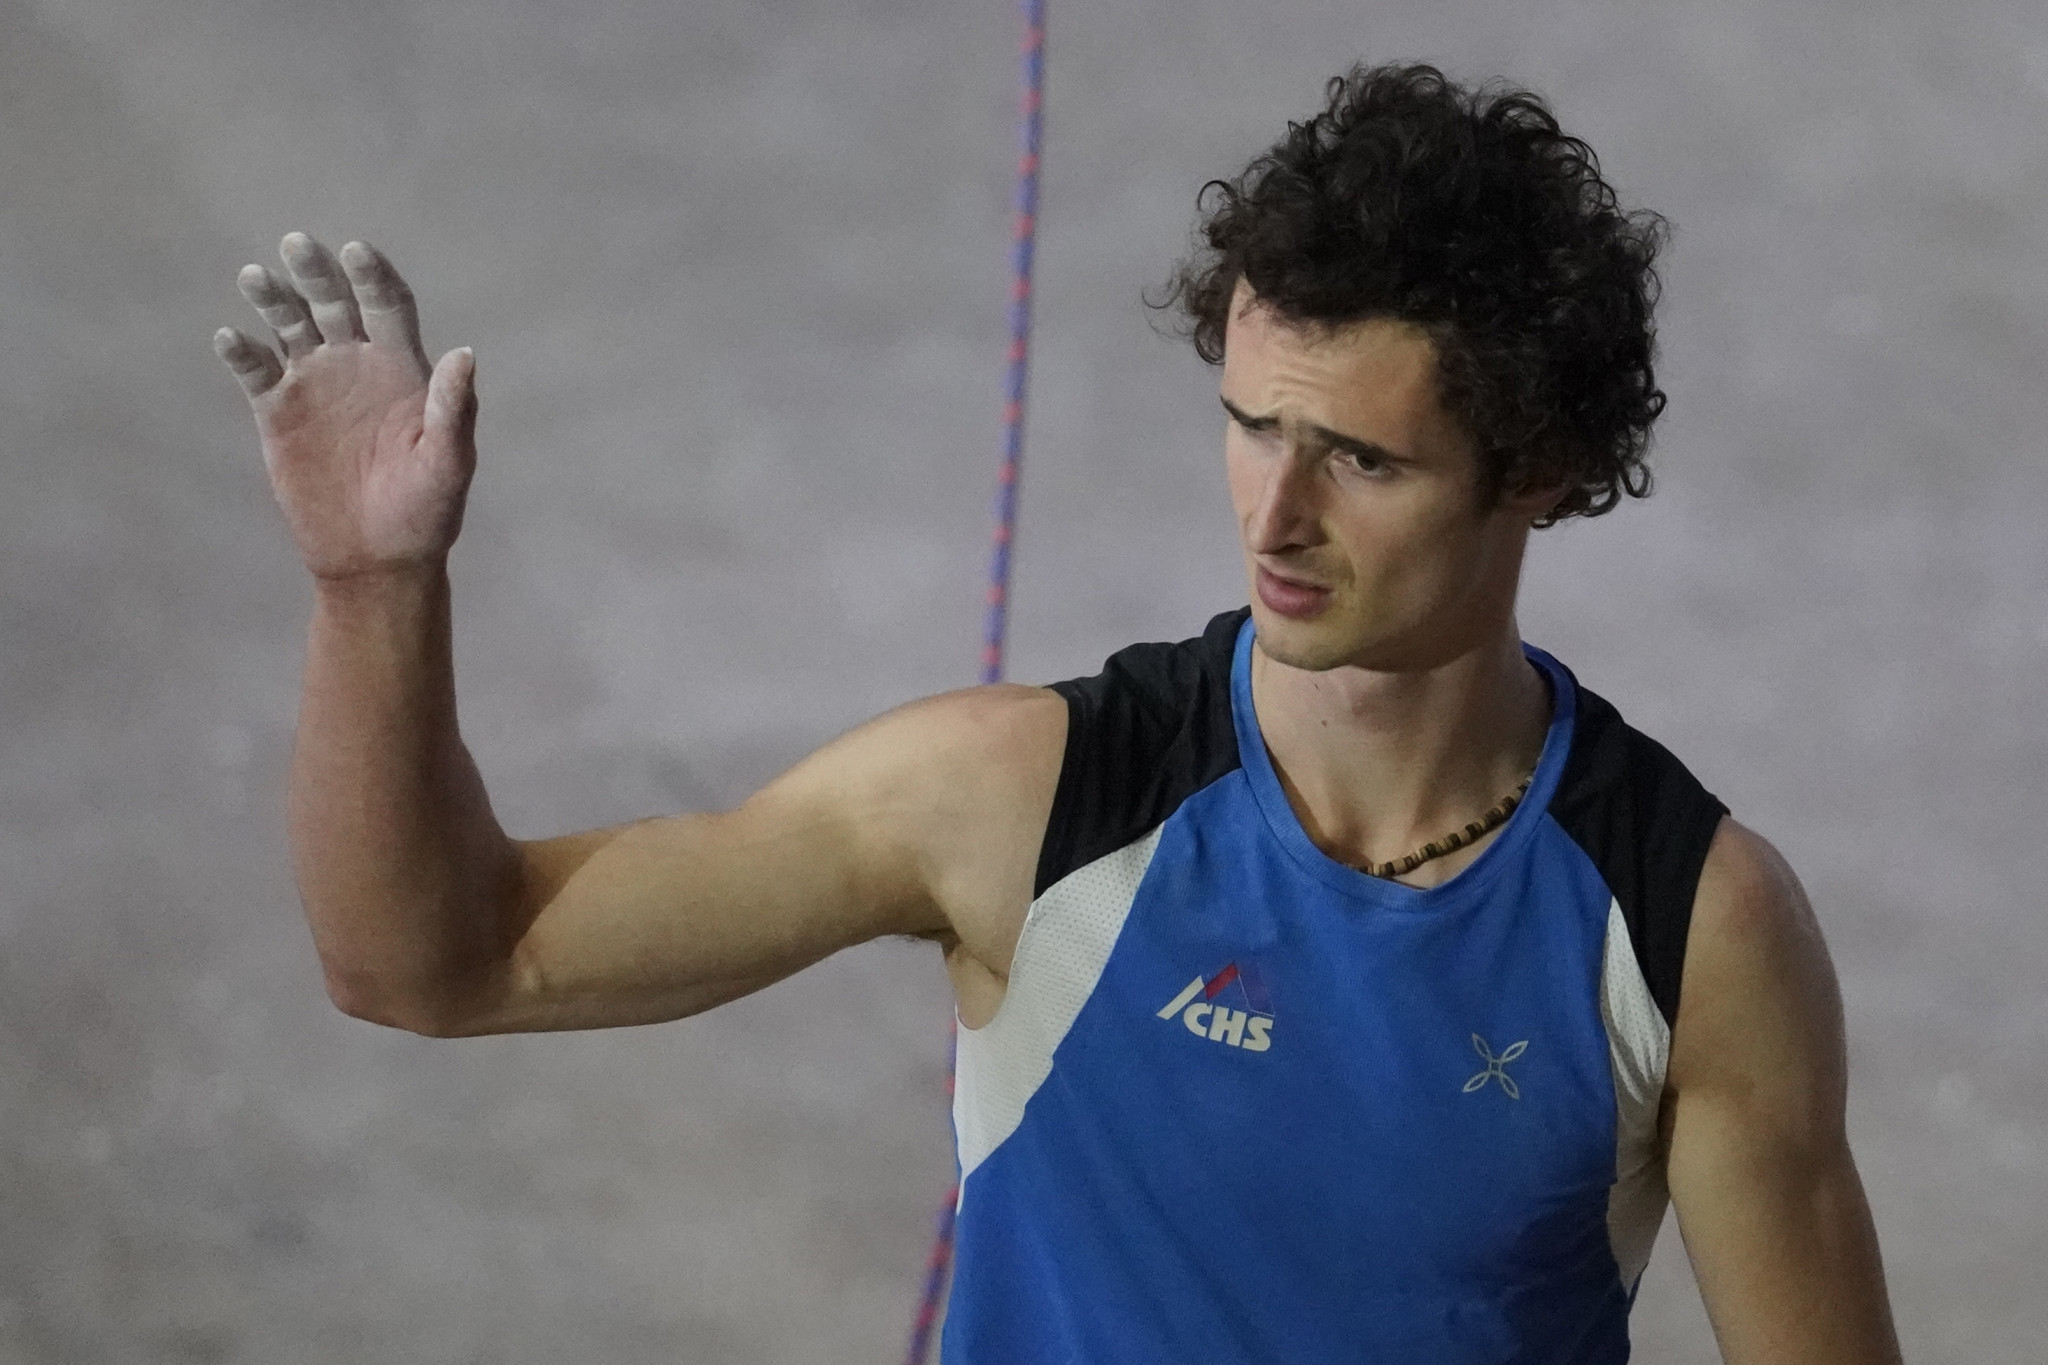 Newly-crowned lead world champion Adam Ondra proved his dominance again with victory at the IFSC World Cup in Kranj ©Getty Images